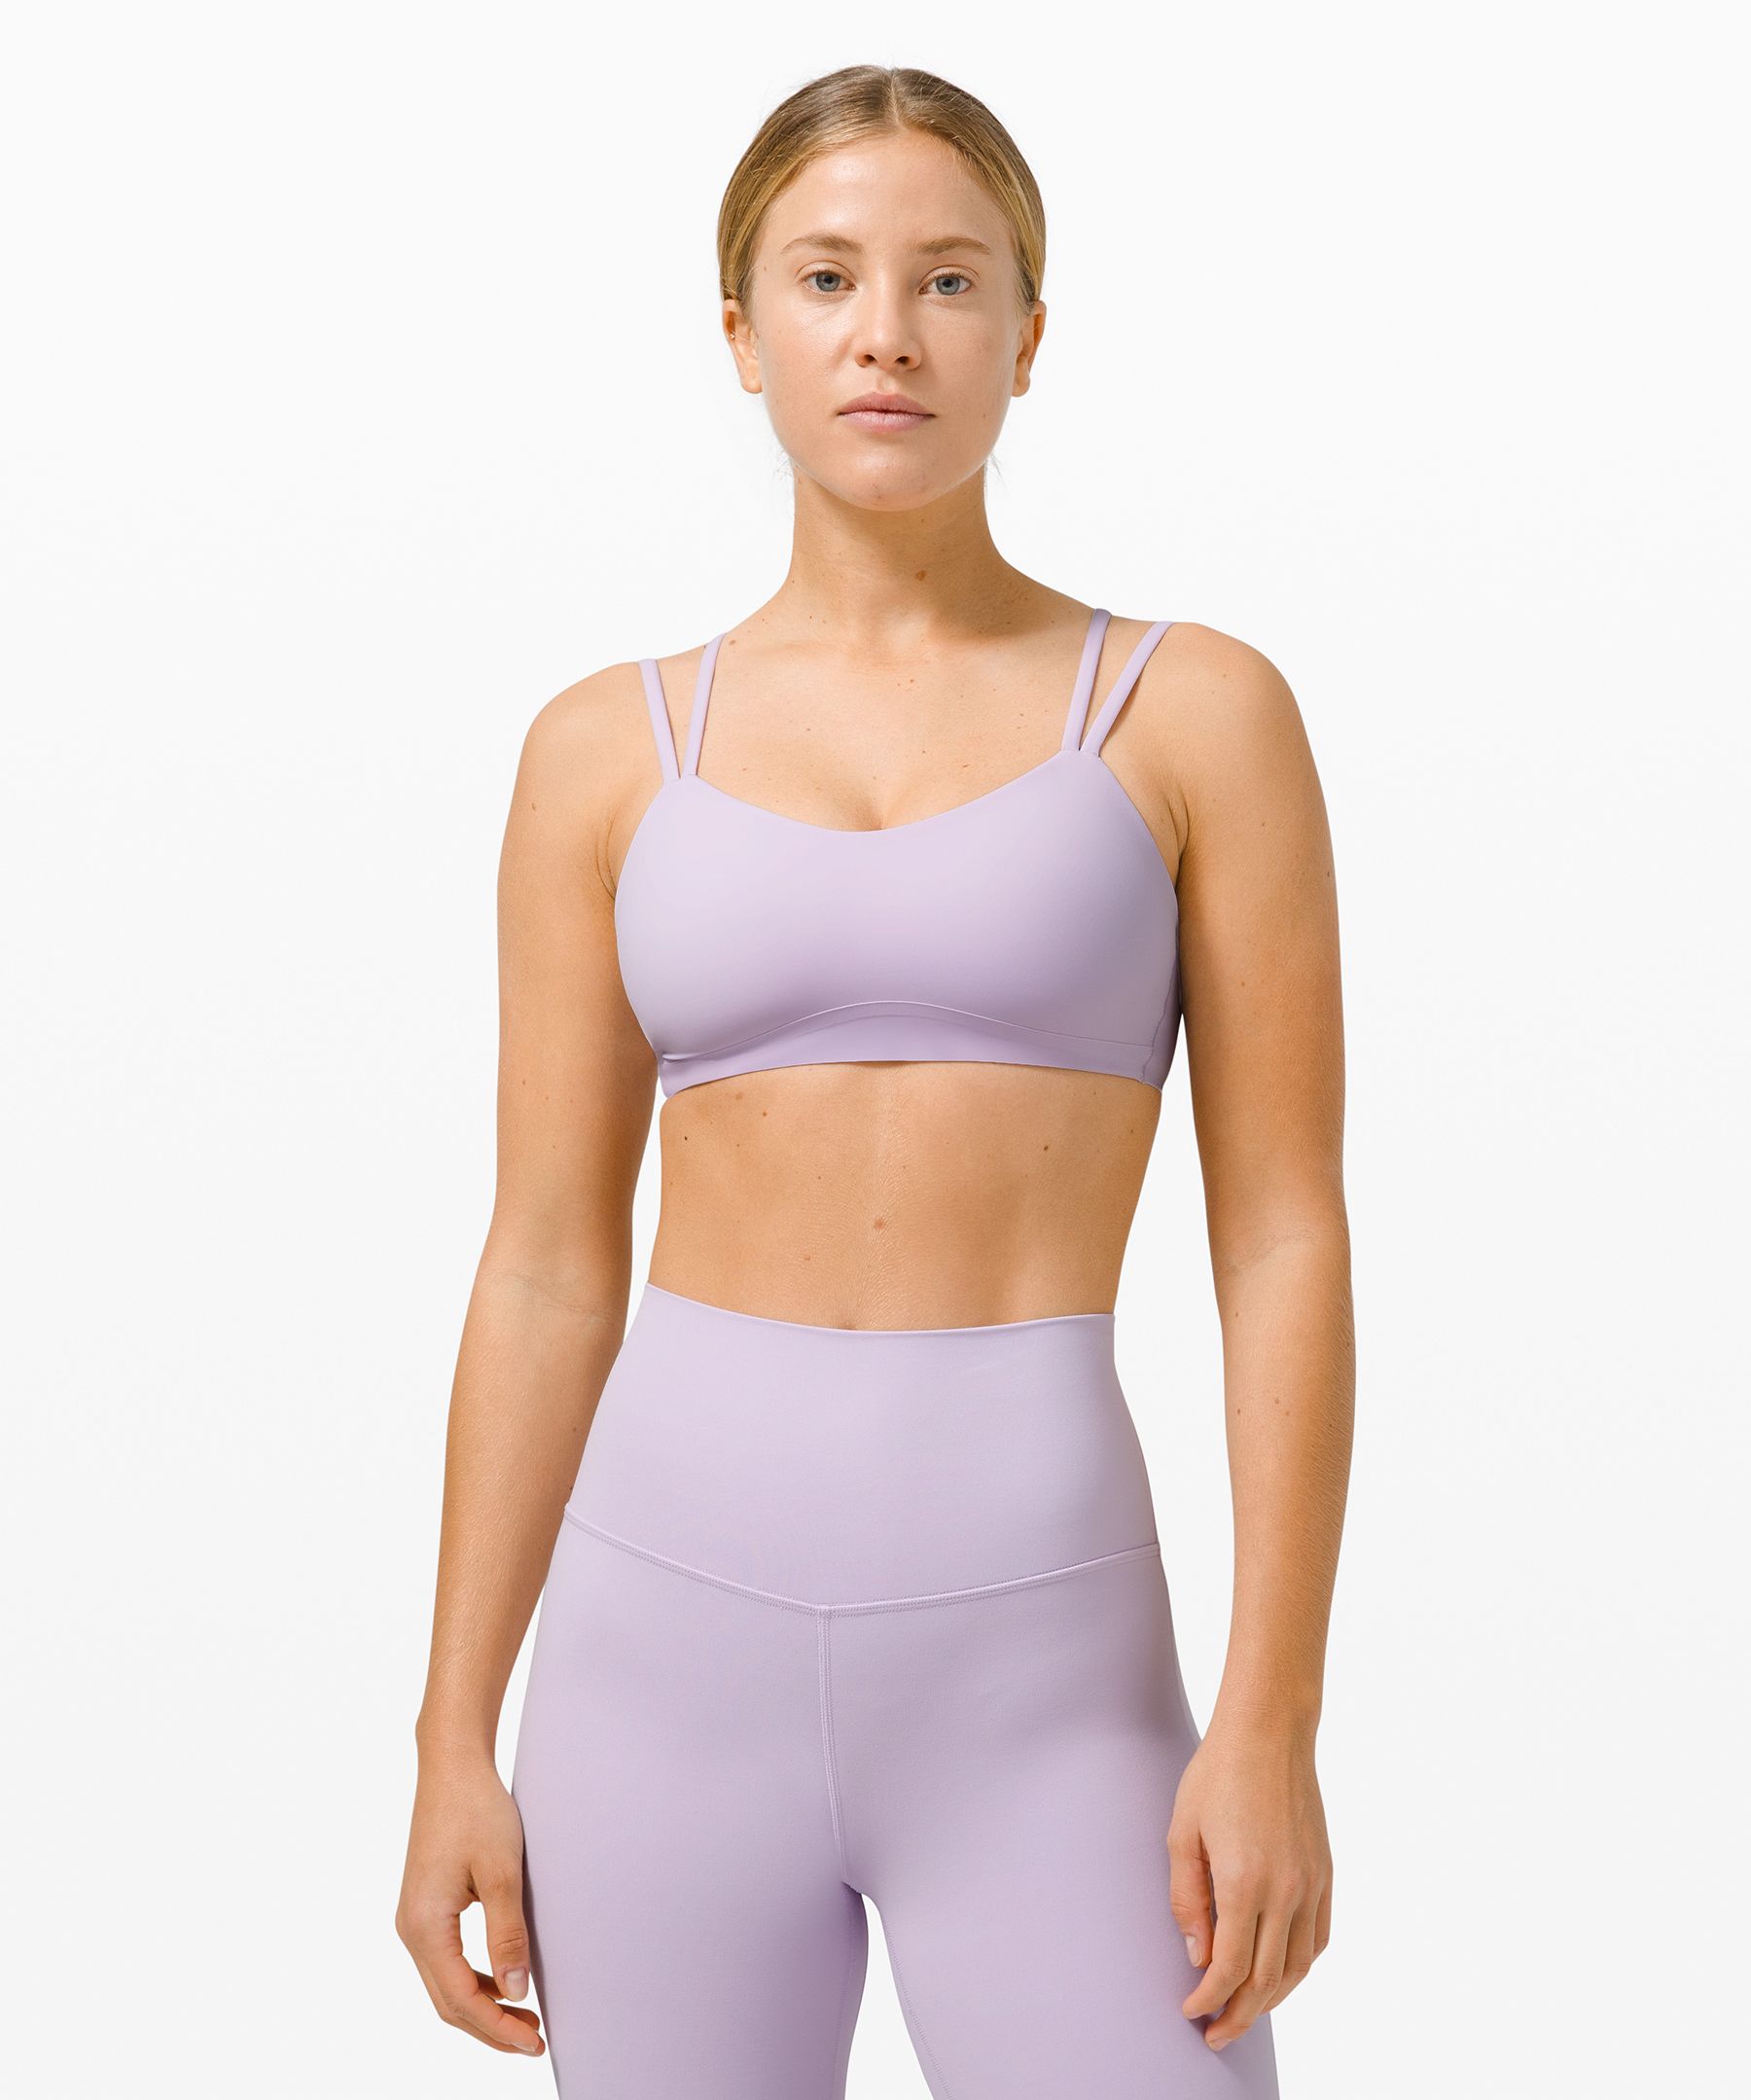 Loving this pink lychee set 🔥 had to purchase it immediately 💗 like a  cloud bra (8) and align 25” (8) : r/lululemon